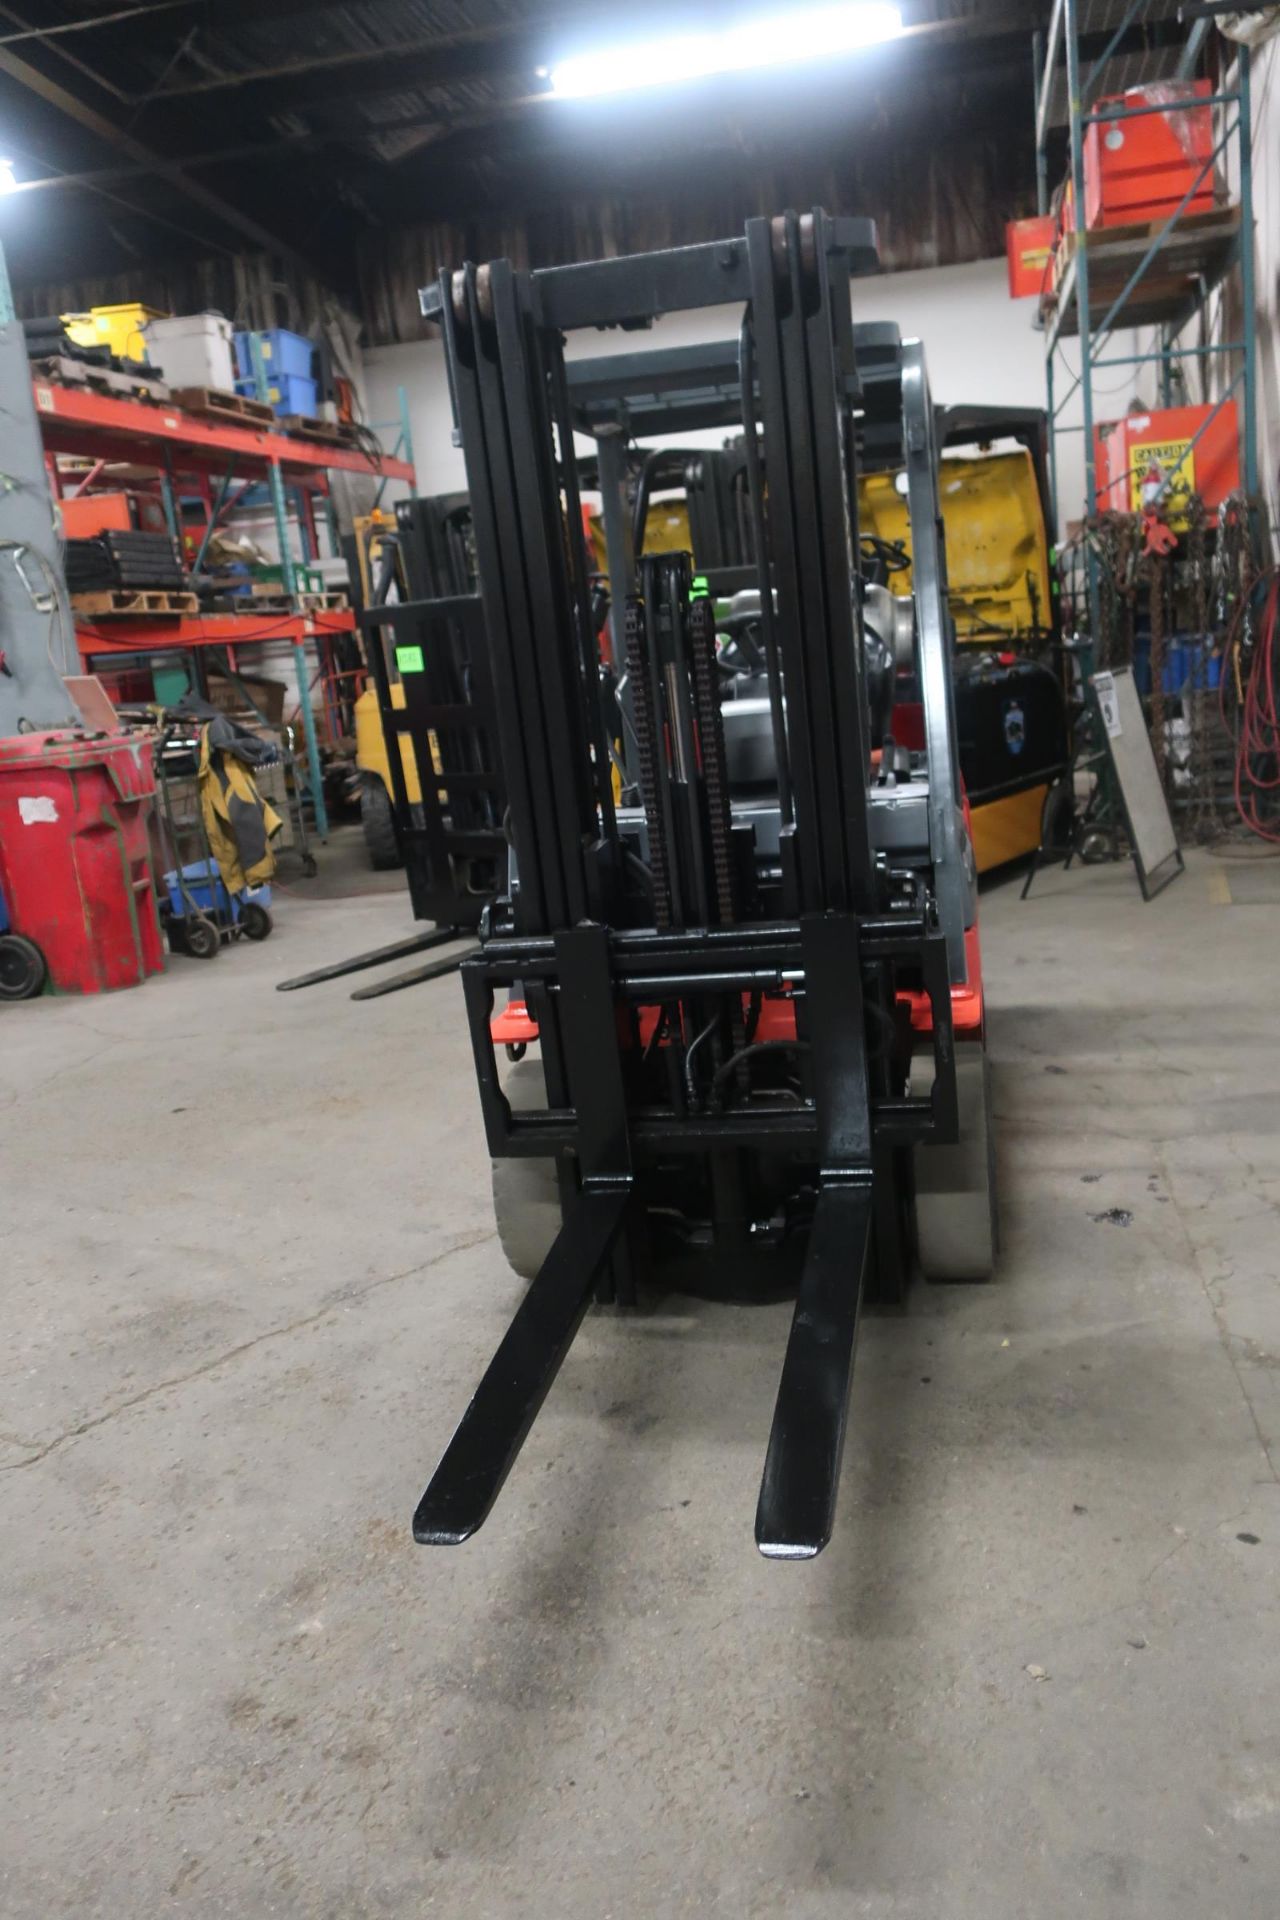 FREE CUSTOMS - 2014 Toyota 5000lbs Capacity Forklift LPG (propane) with 3-stage mast with - Image 2 of 2